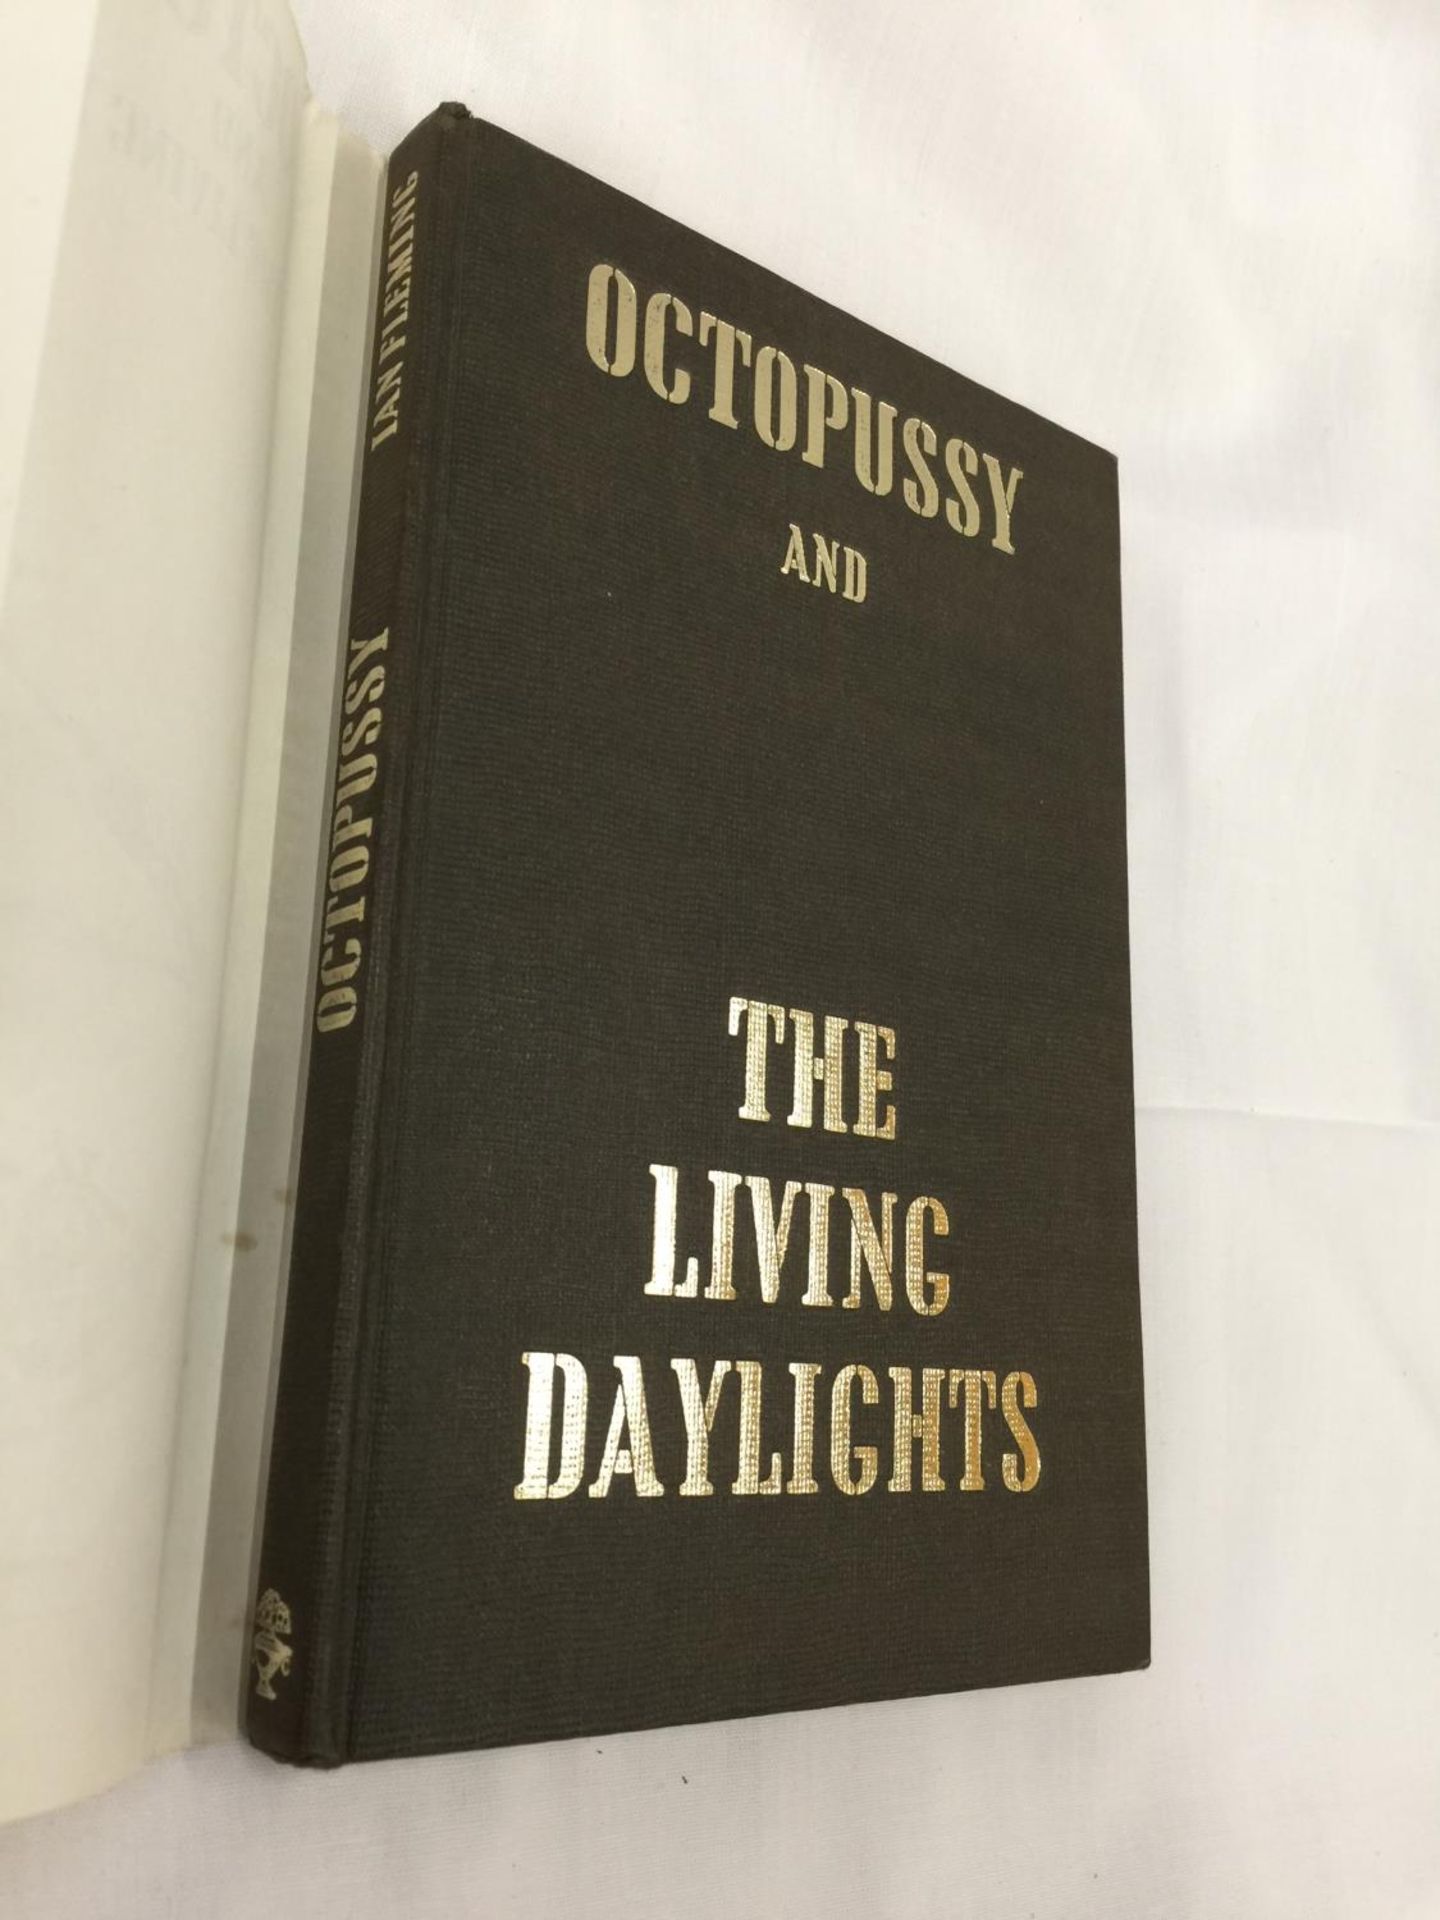 A FIRST EDITION JAMES BOND NOVEL - OCTOPUSSY AND THE LIVING DAYLIGHTS BY IAN FLEMING, HARDBACK - Image 5 of 11